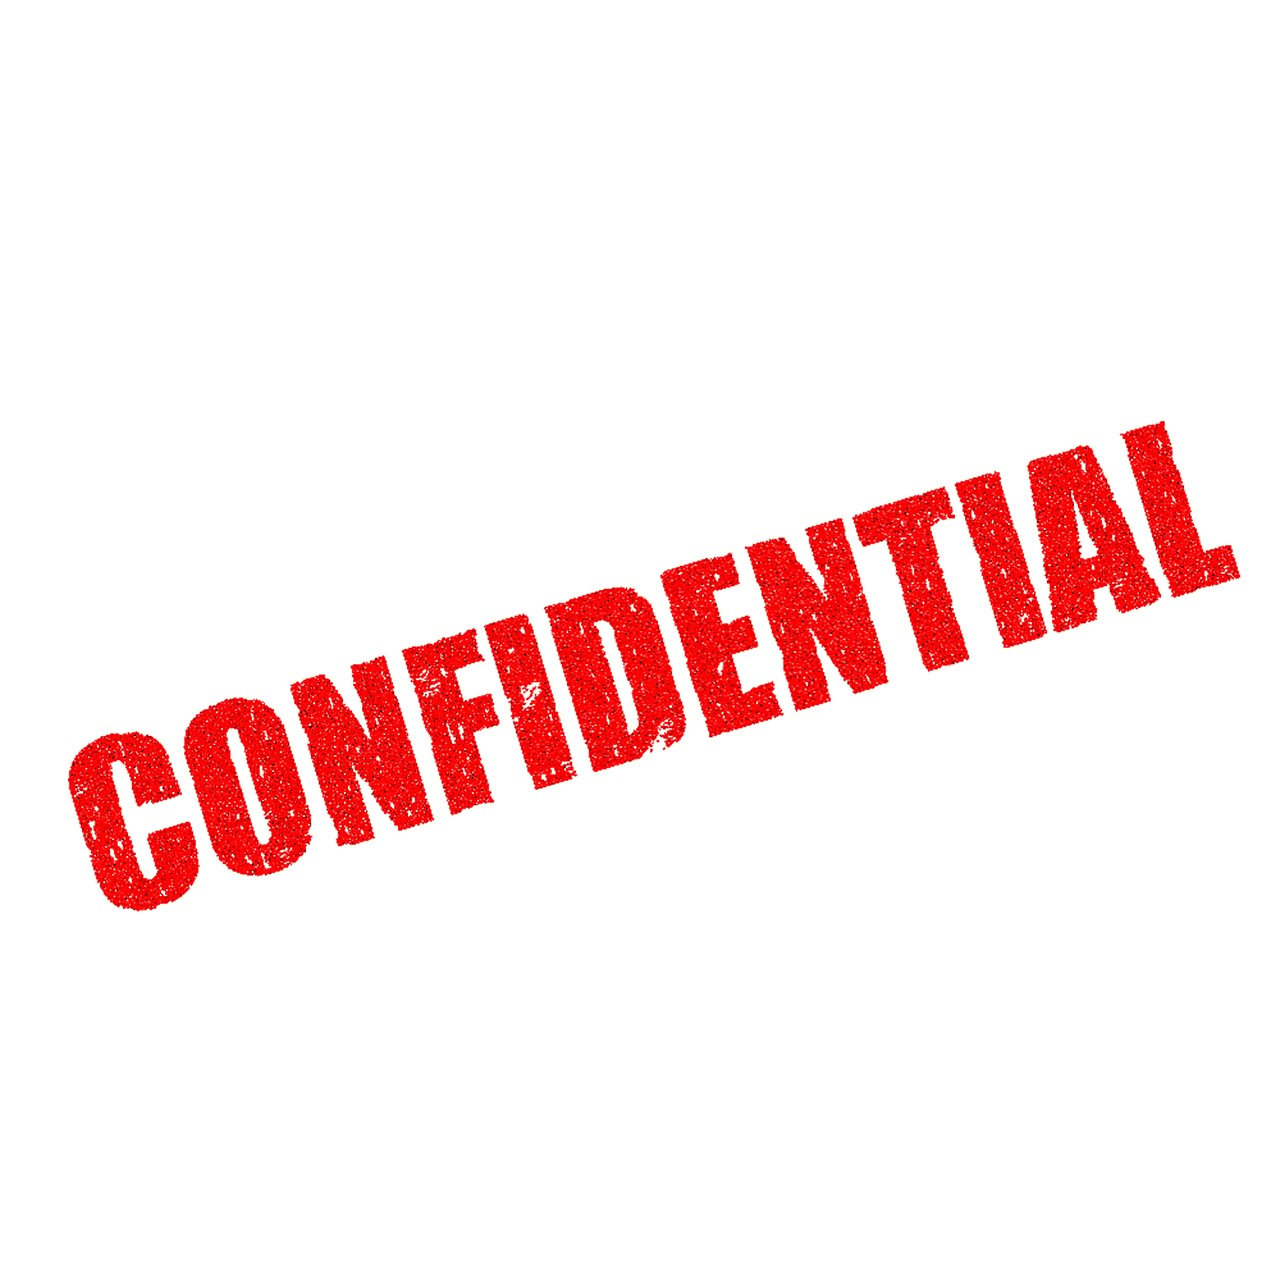 Lack of Access Control - Ensuring Confidentiality in Office Applications